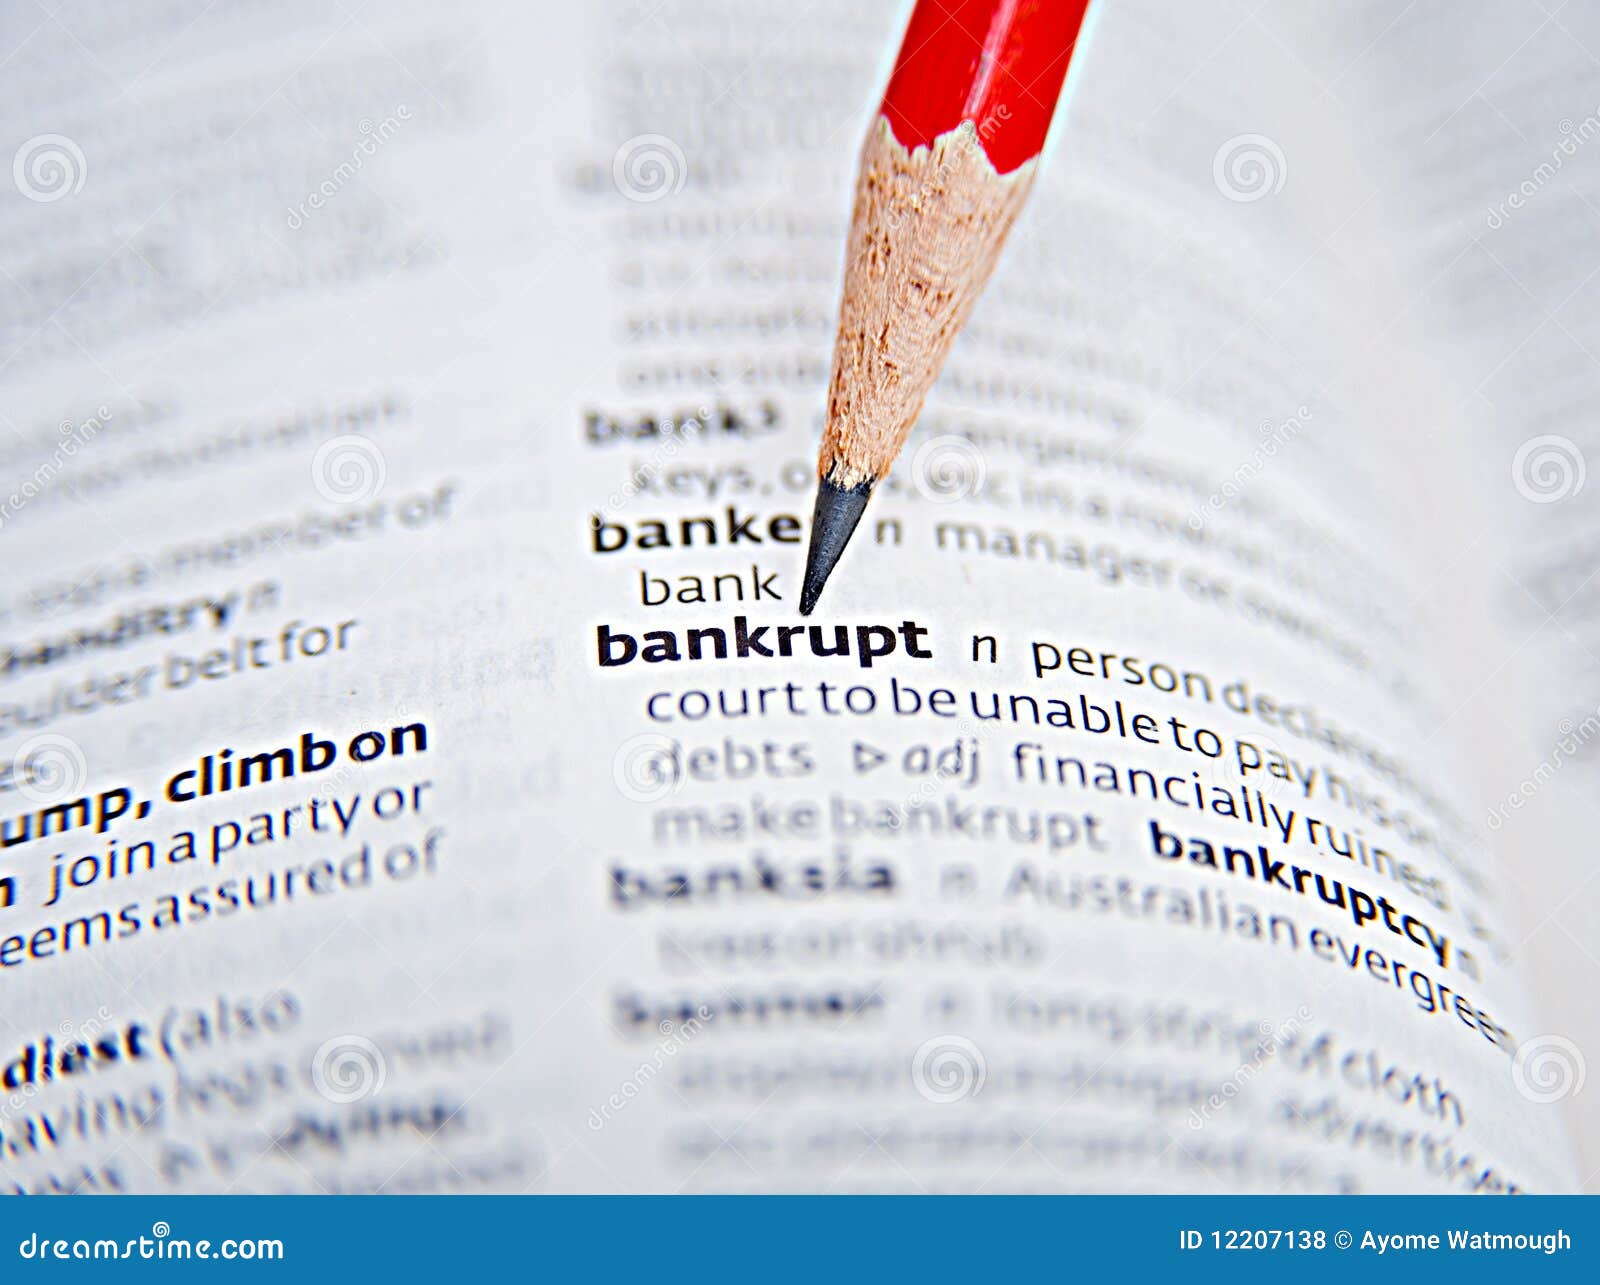 bankrupt; effects of recession.